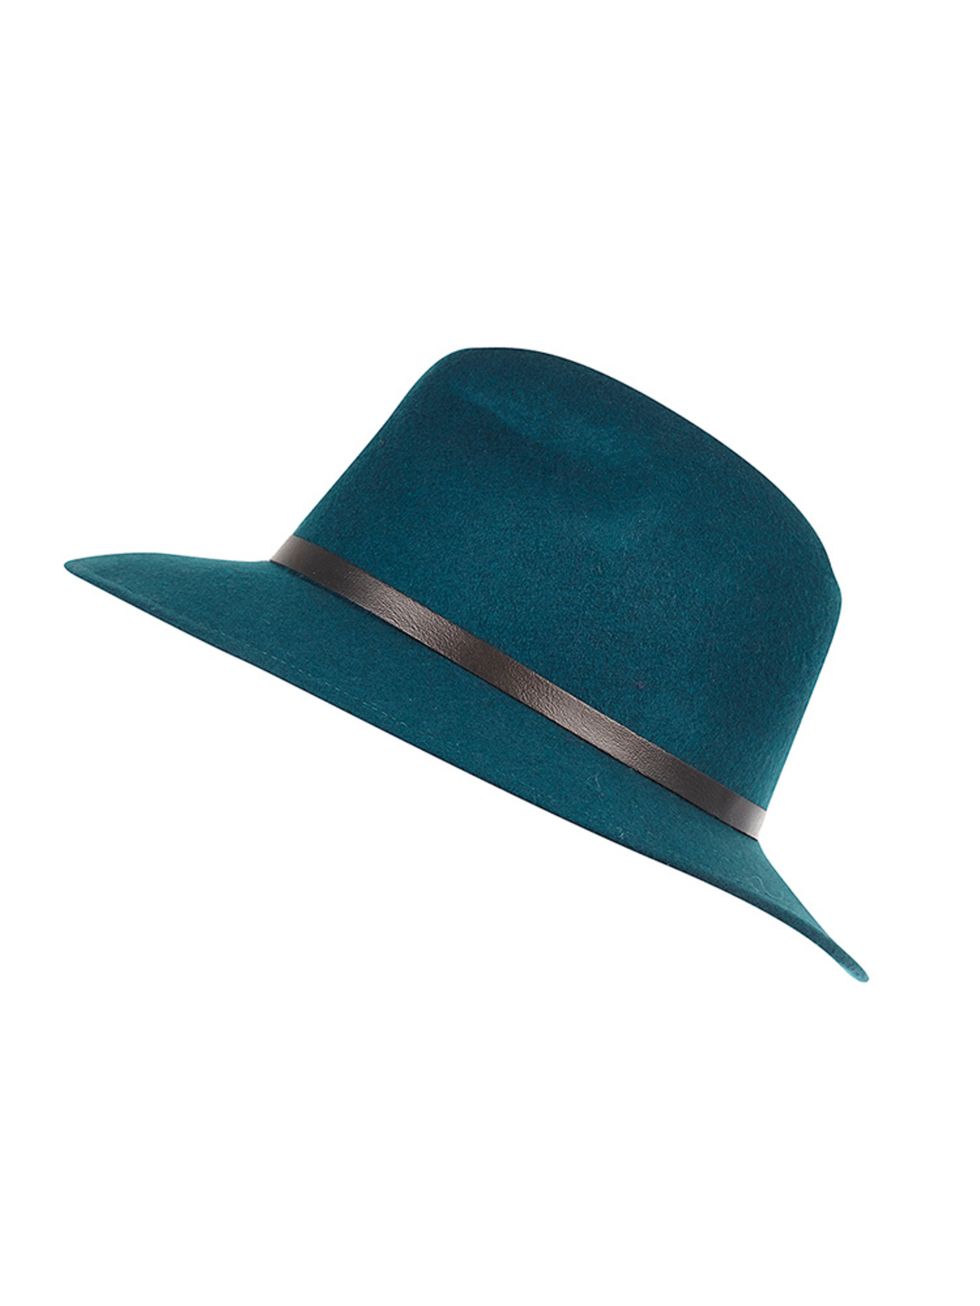 <p>For effortless elegance, try a fedora.</p>

<p><a href="http://www.riverisland.com/women/accessories/hats/Green-leather-look-trim-fedora-hat-666452" target="_blank">River Island fedora</a>, &pound;25.</p>